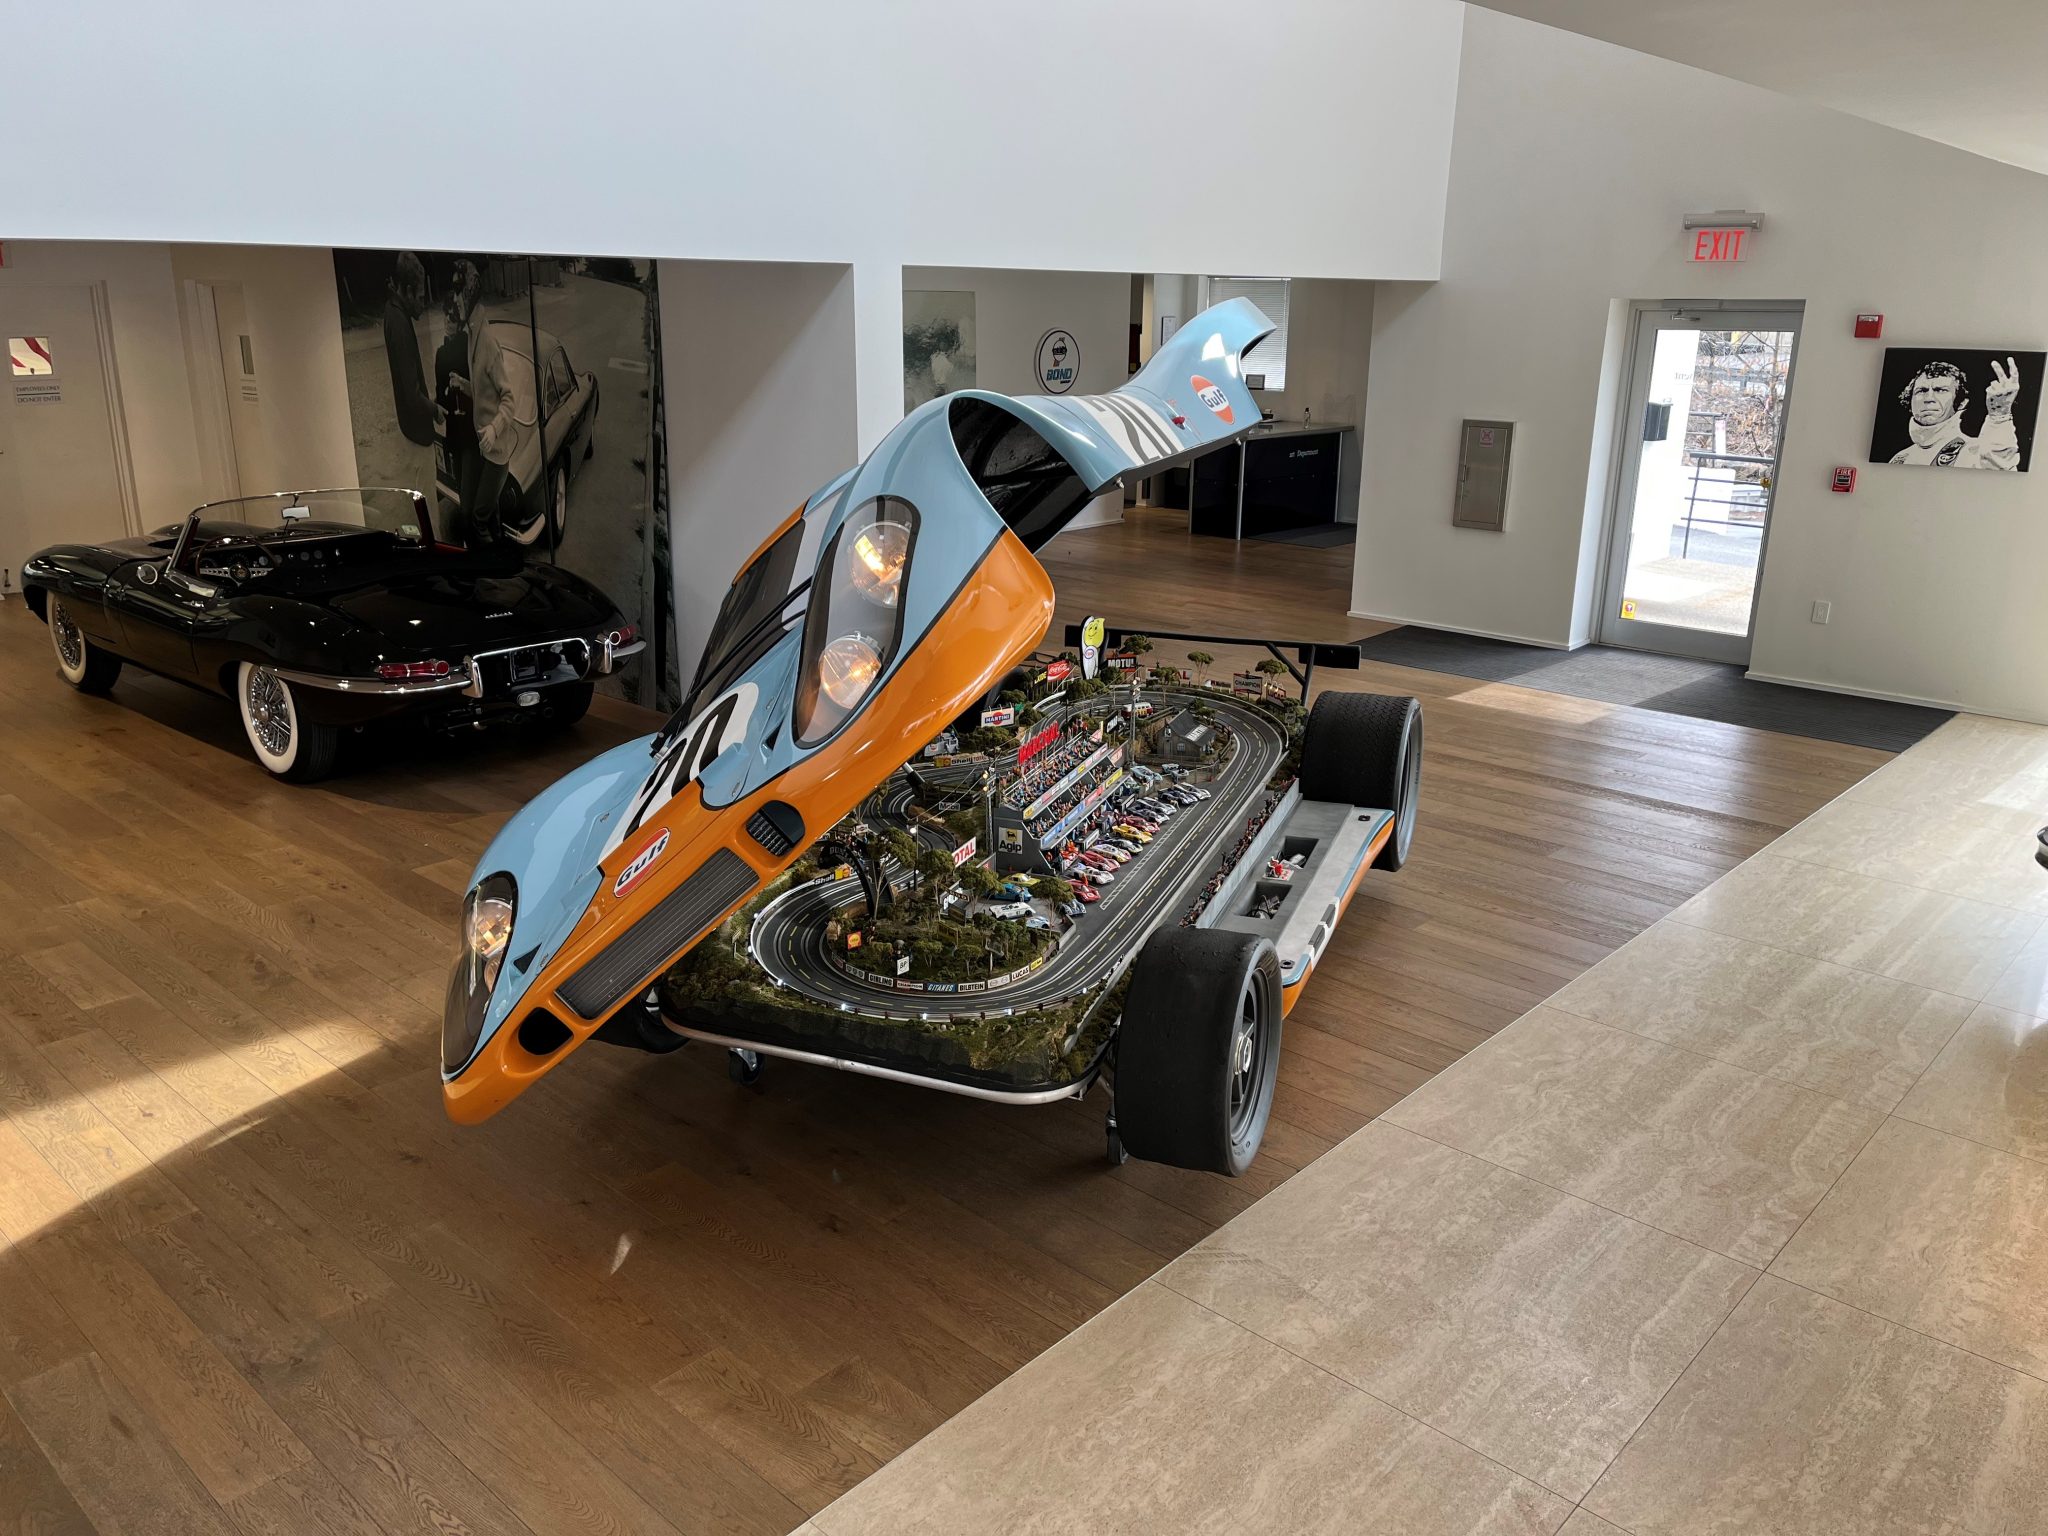 Slots of fun: Replica Porsche 917 body comes with its own Le Mans track